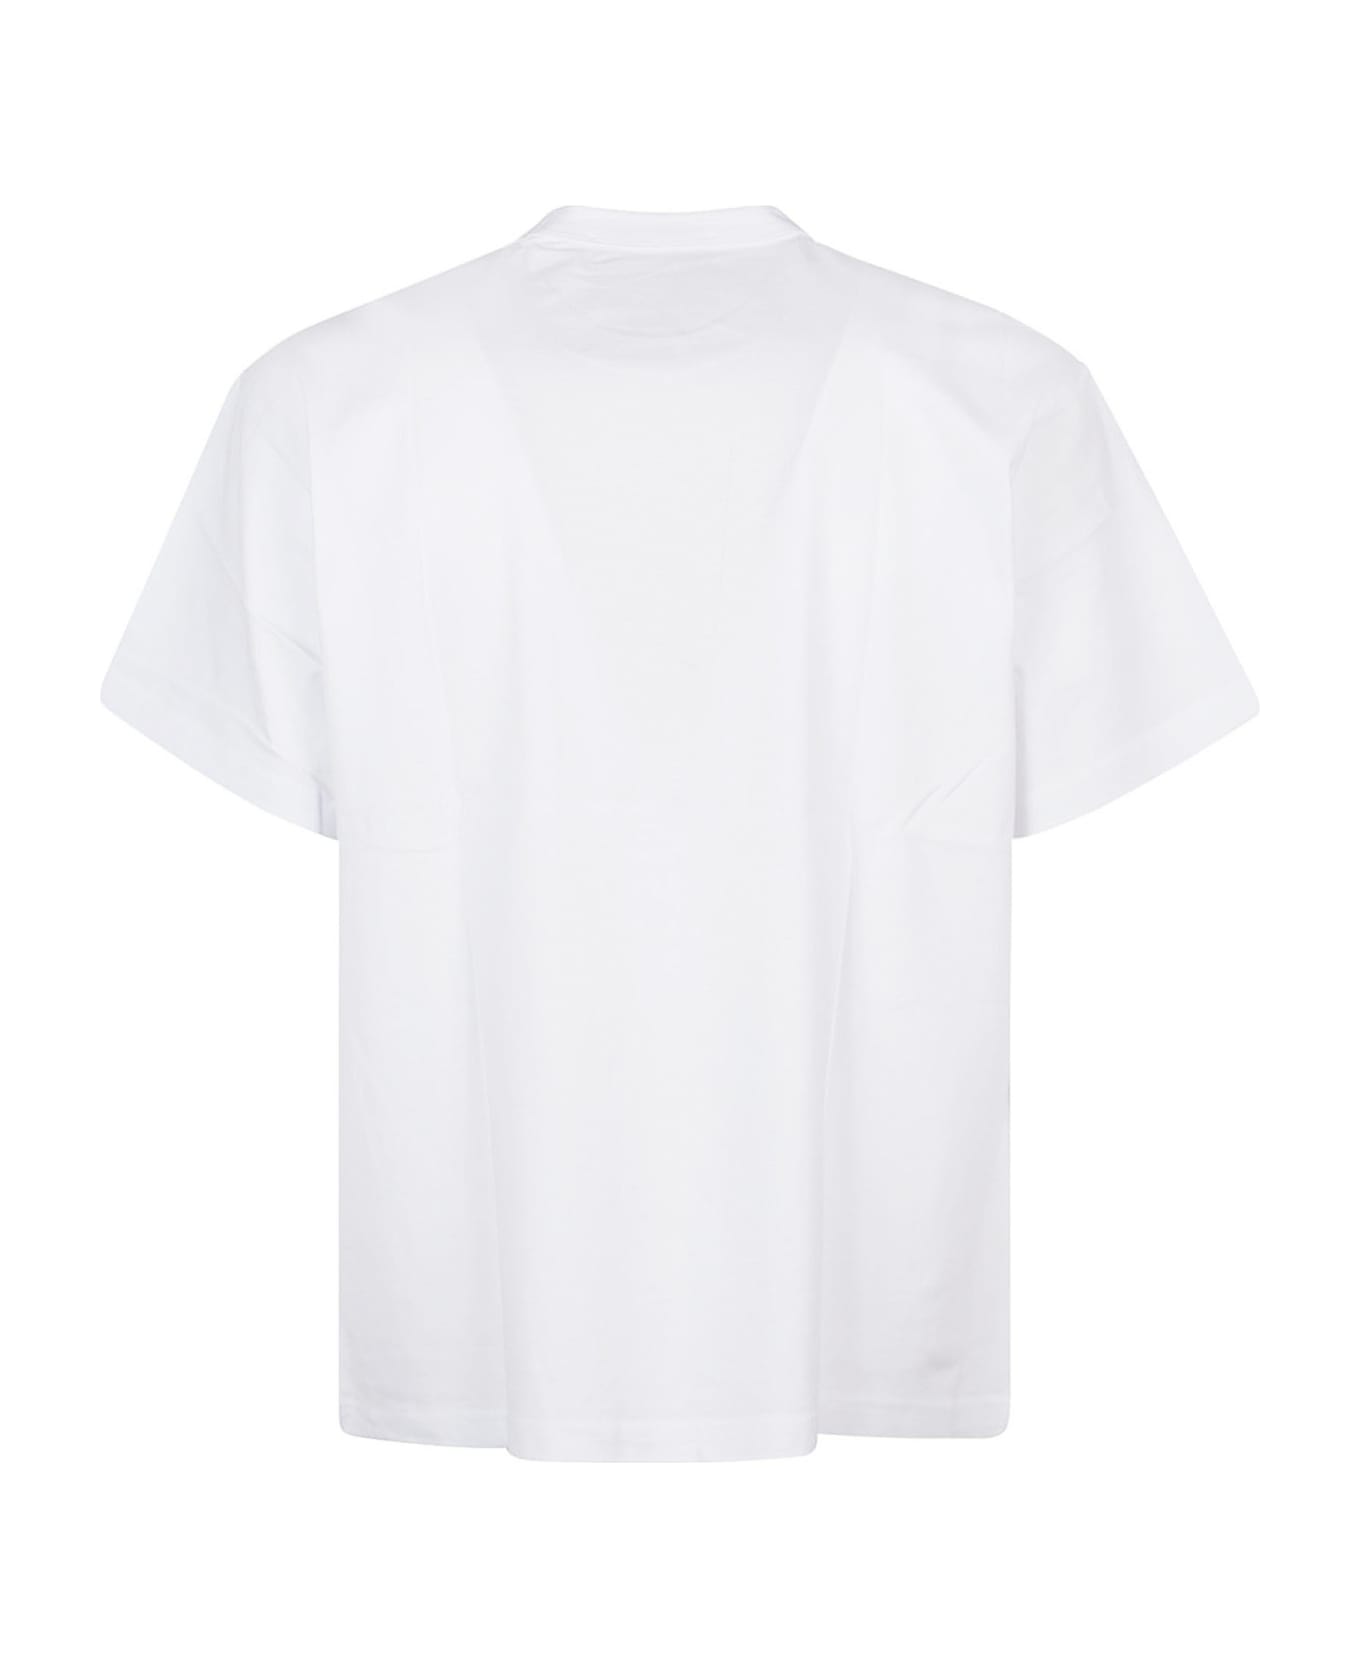 Versace Jeans Couture Small Heart Couture T-shirt - White